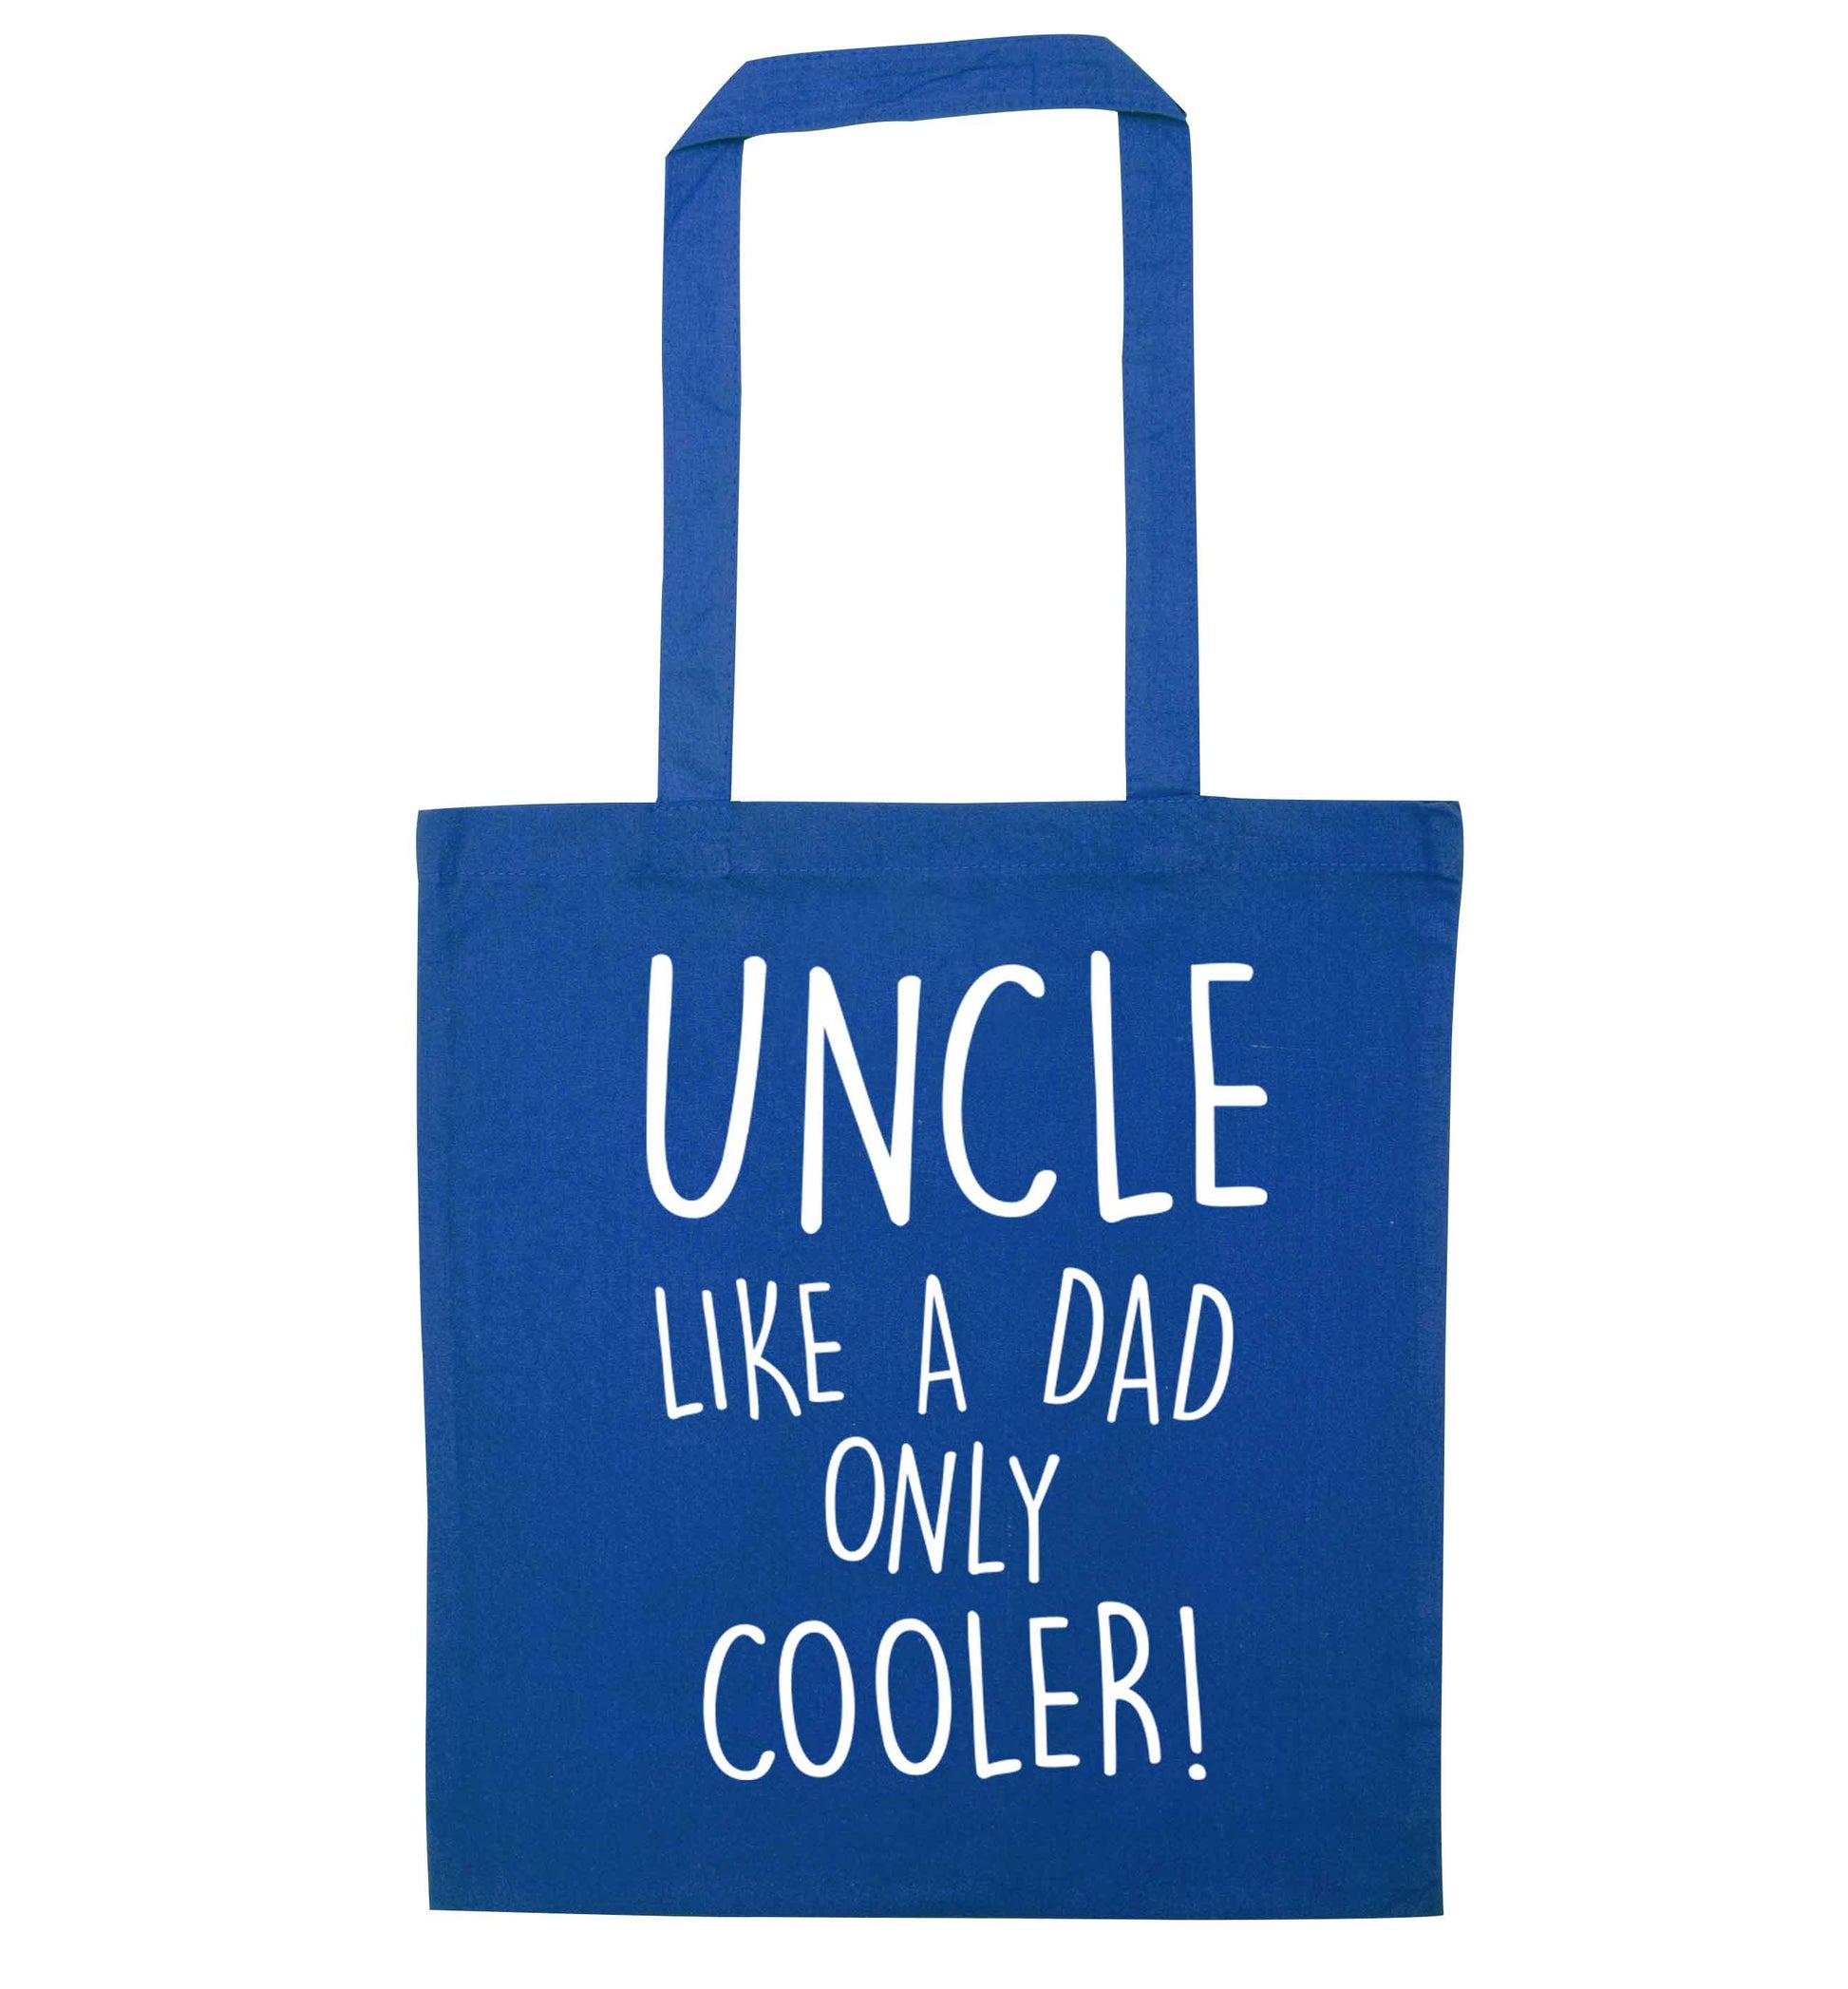 Uncle like a dad only cooler blue tote bag